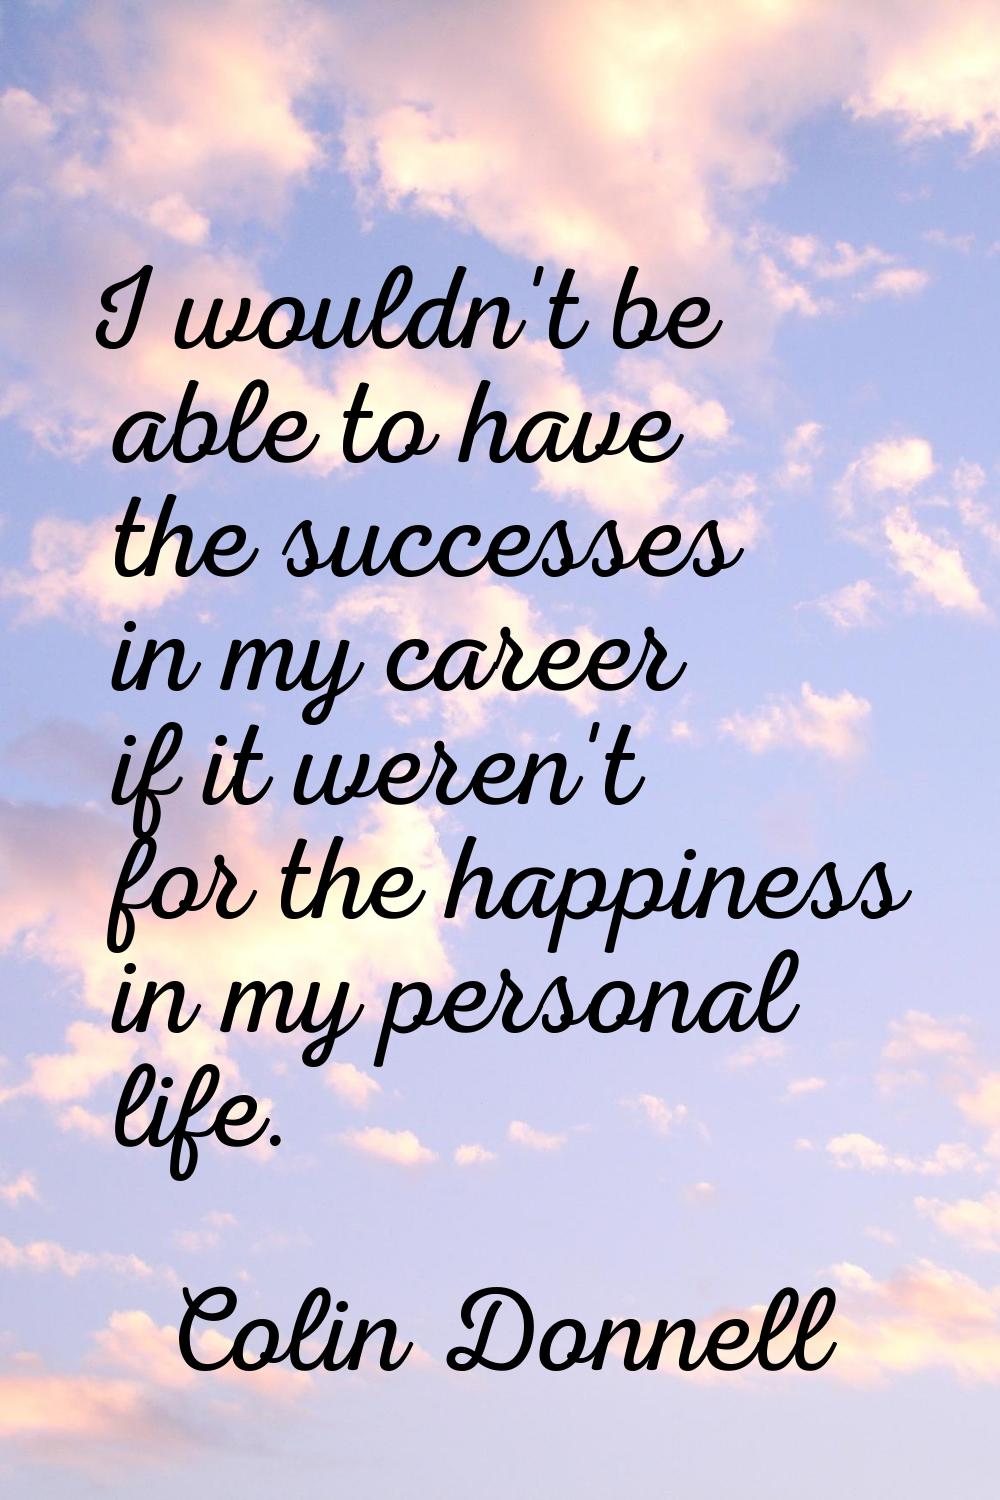 I wouldn't be able to have the successes in my career if it weren't for the happiness in my persona